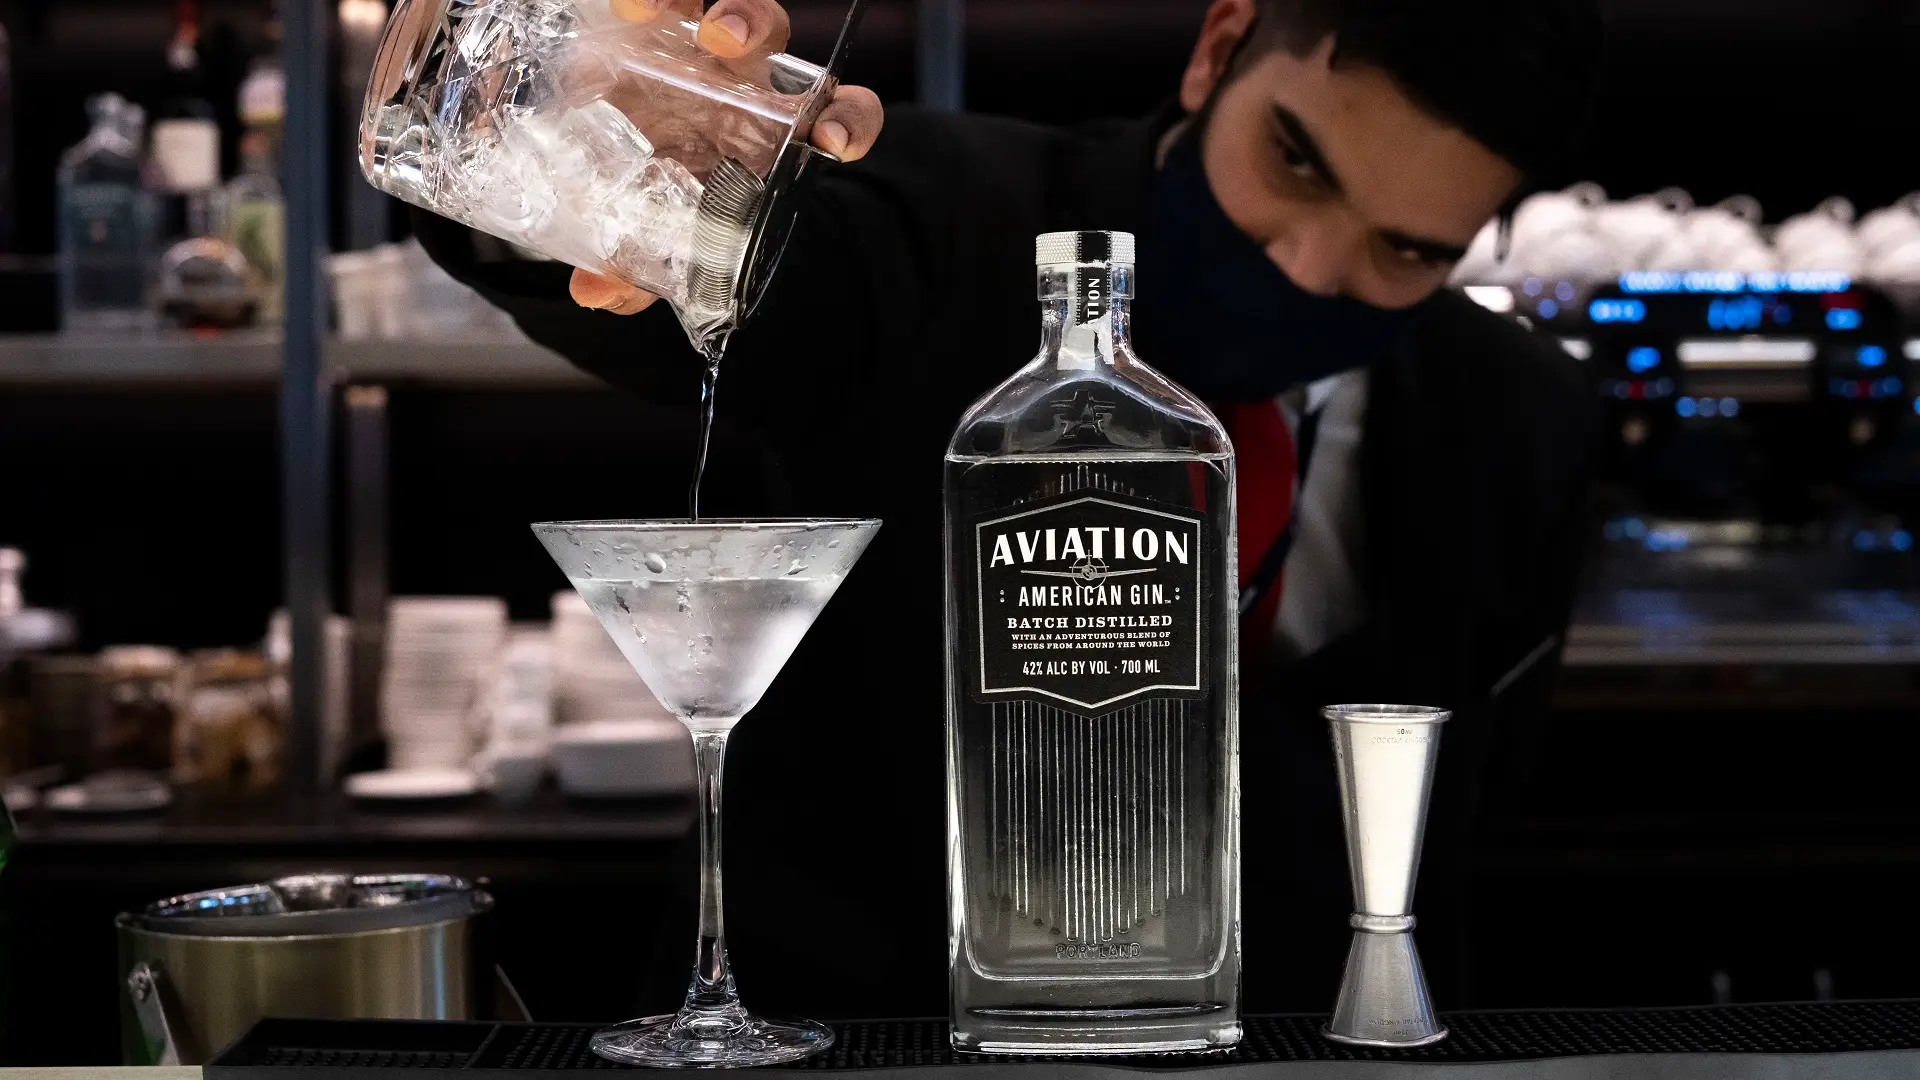 Airlines News - Ryan Reynolds-backed Aviation American Gin to debut on British Airways flights